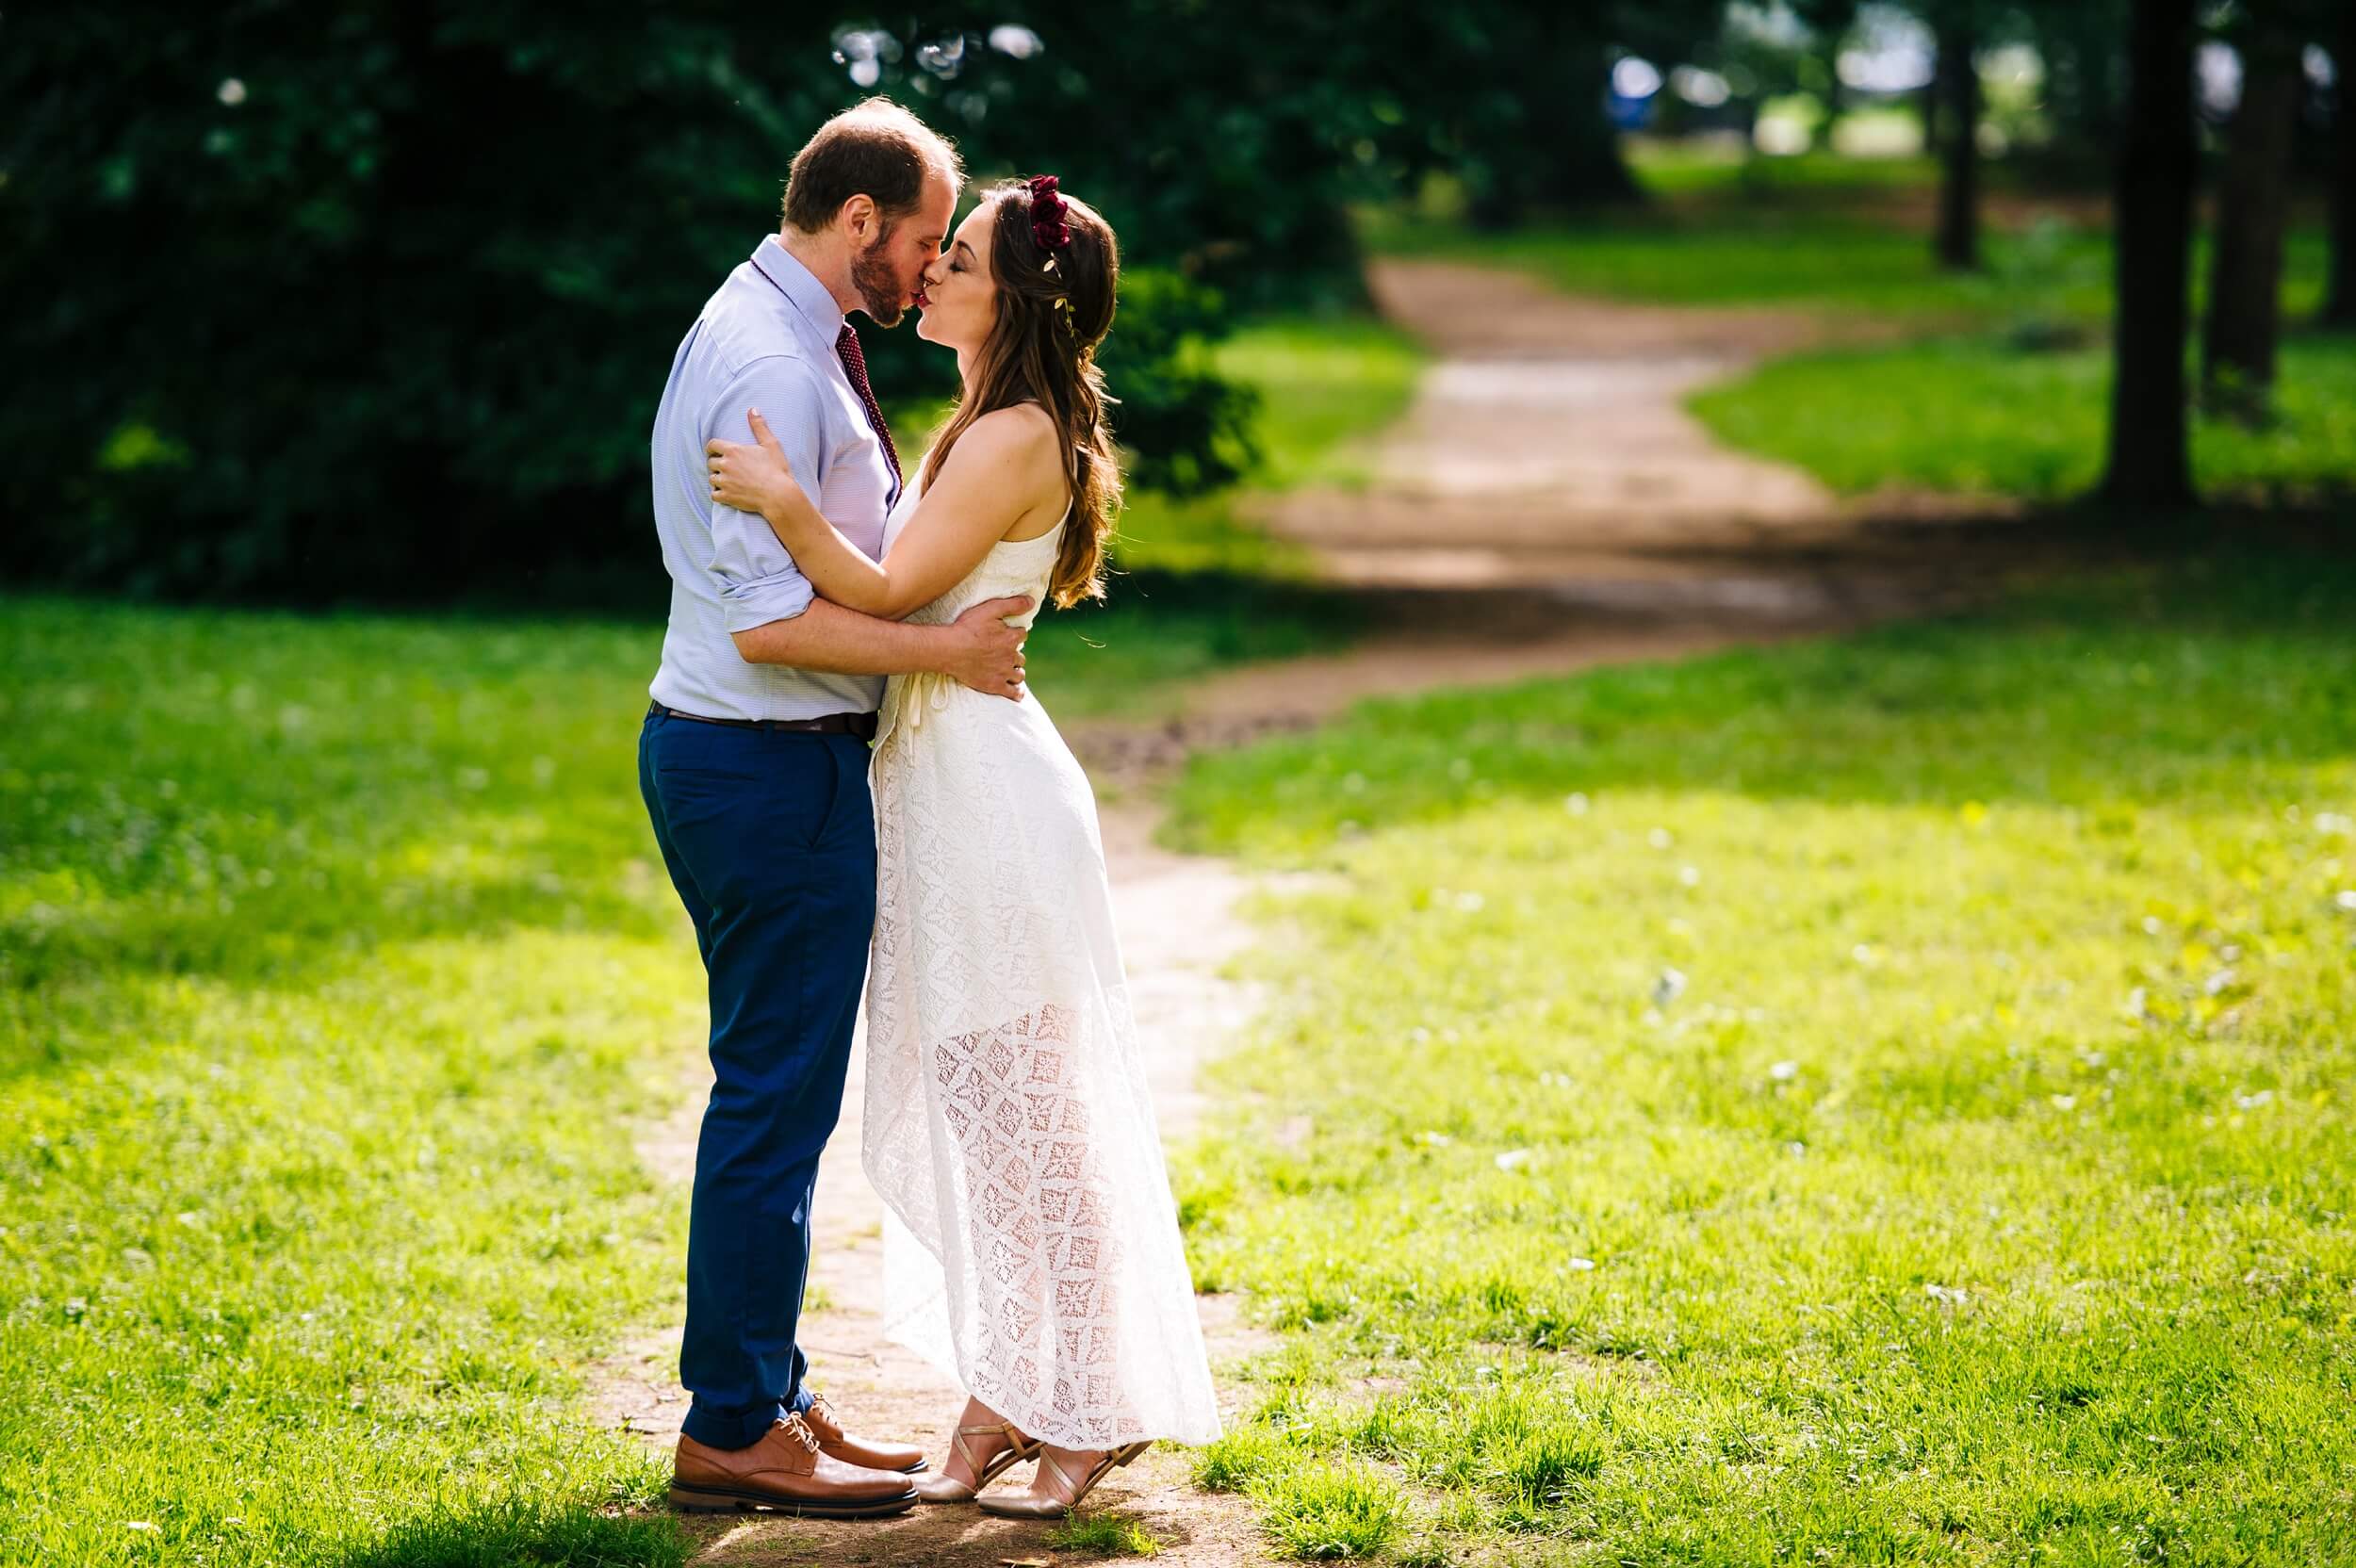 couple kissing with sunlight and greenery behind in washington dc